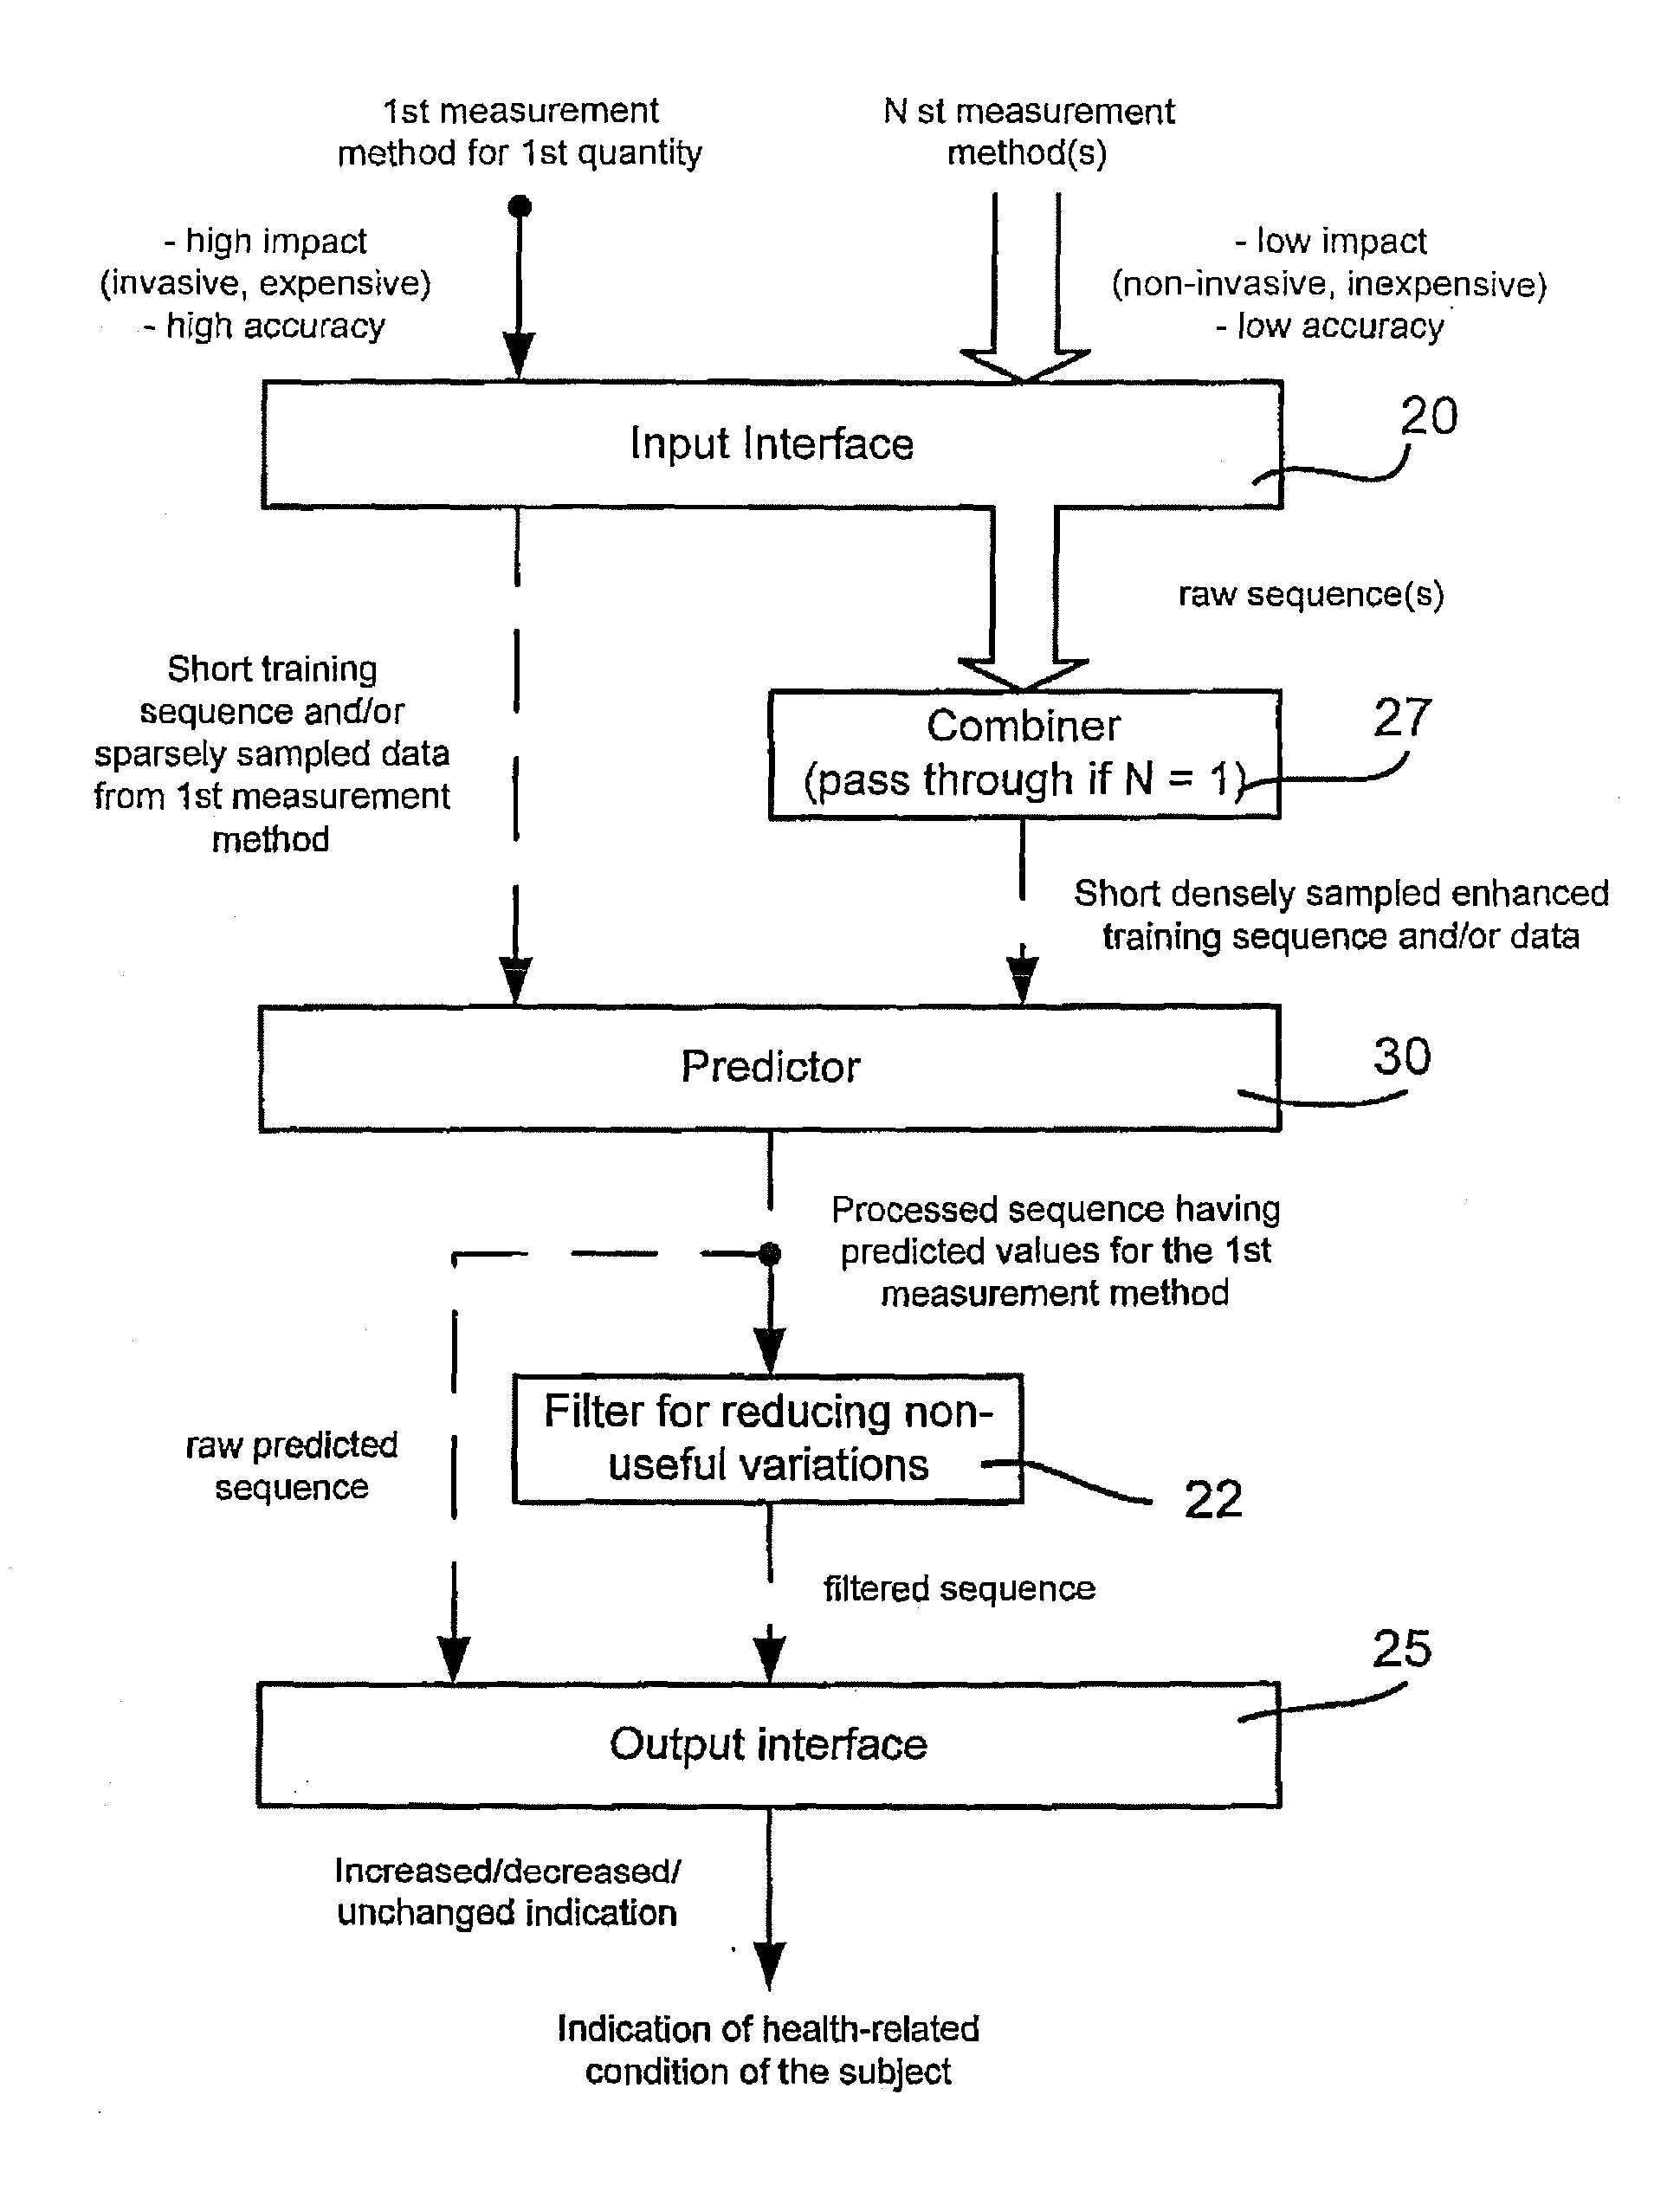 Metabolic Monitoring, a Method and Apparatus for Indicating a Health-Related condition of a Subject